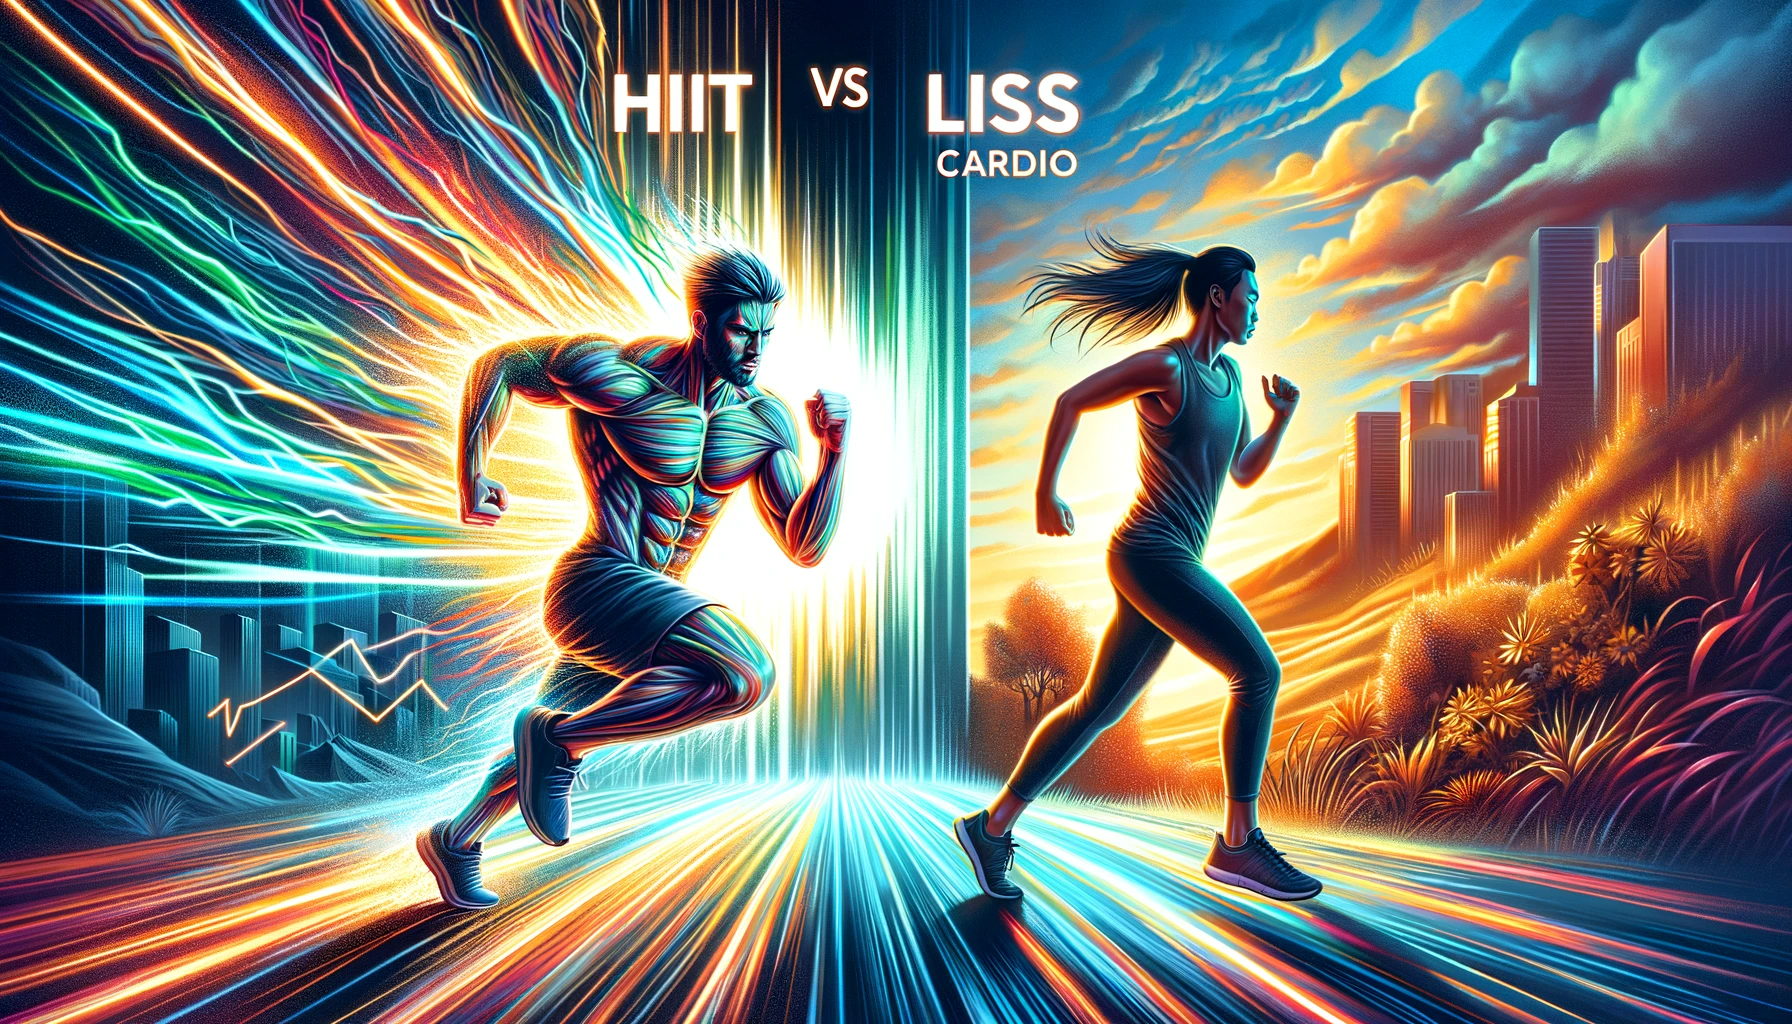 HIIT vs LISS Cardio Pros, Cons And What Cardio Is Best